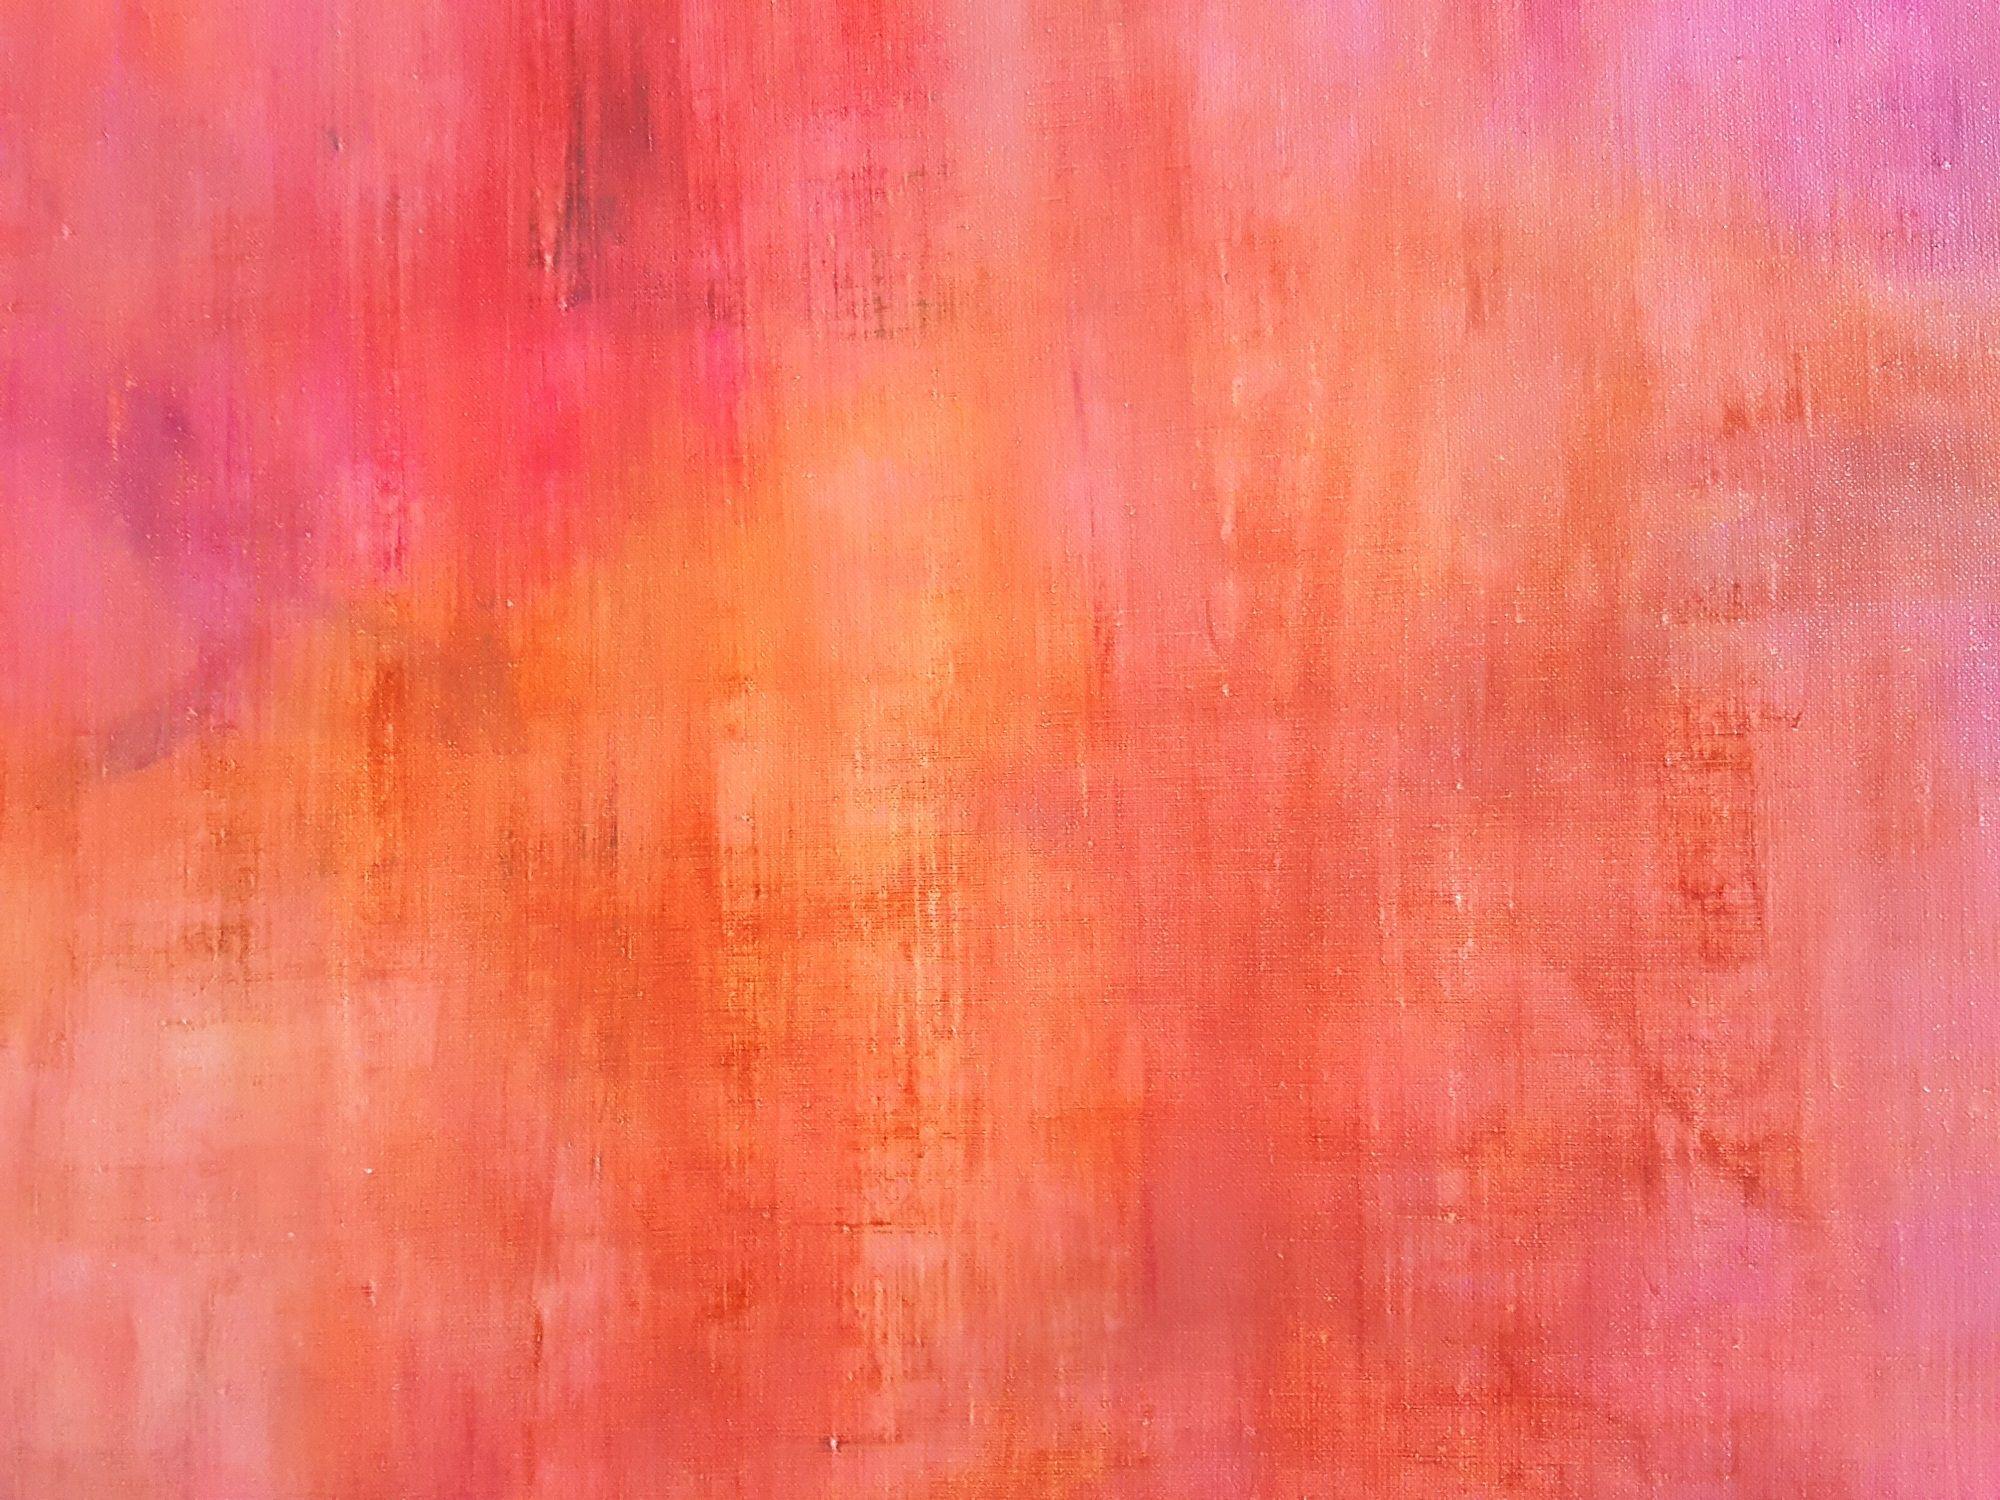 In the pink fog - XXL abstract, Painting, Acrylic on Canvas - Pink Abstract Painting by Ivana Olbricht